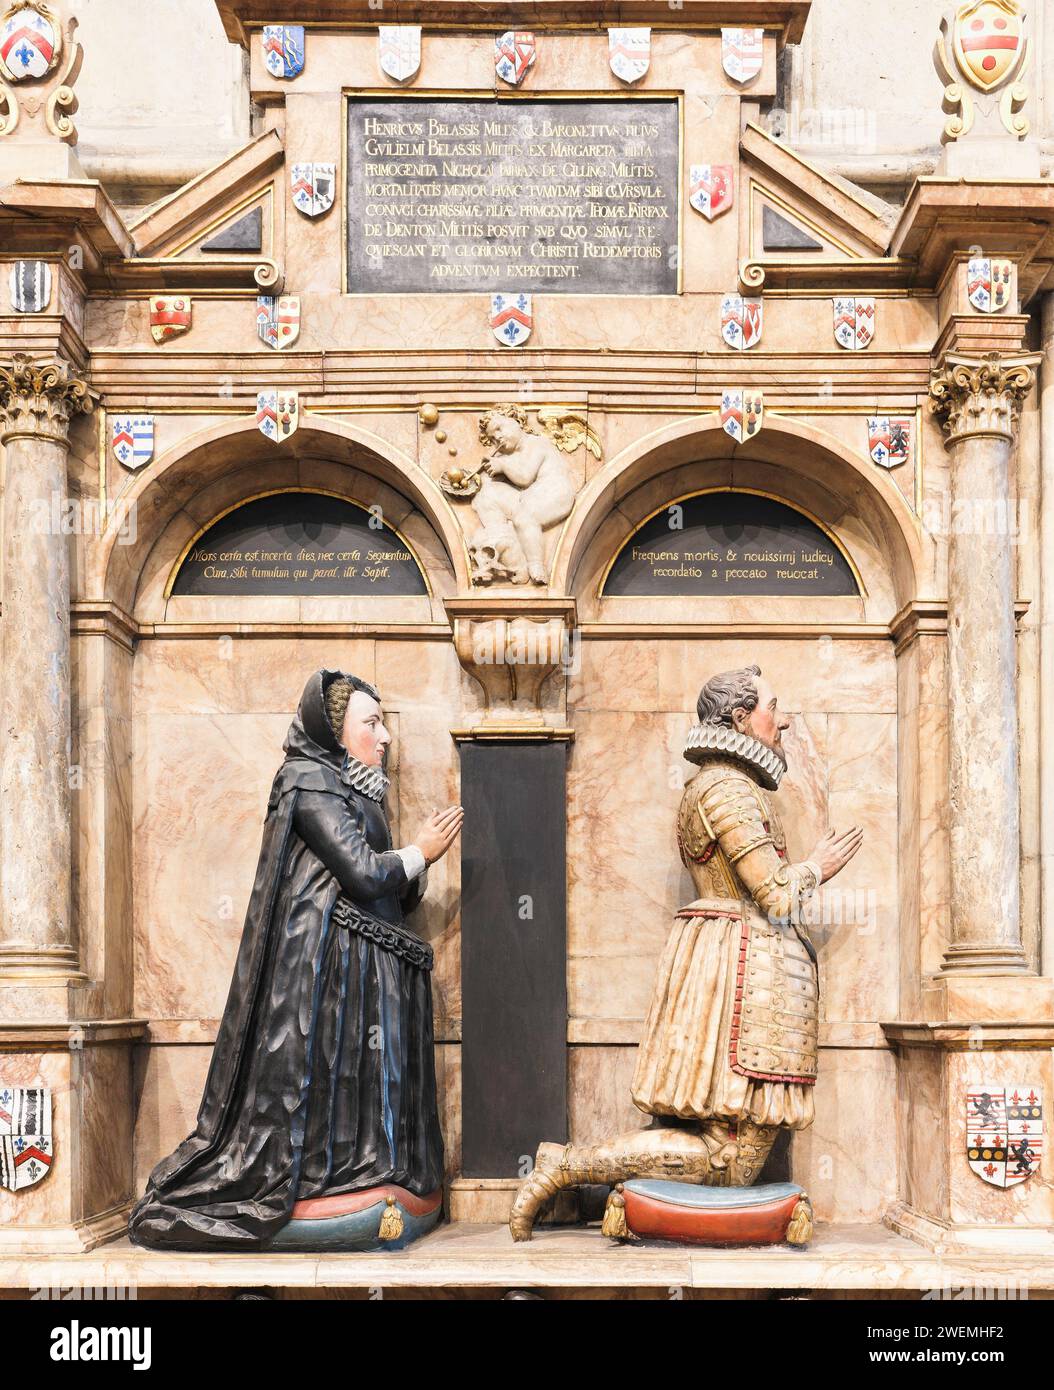 Statues, of a pious couple hoping to be as well off in the afterlife as they were in earthly life, on a wall at the minster (cathedral), York, England. Stock Photo